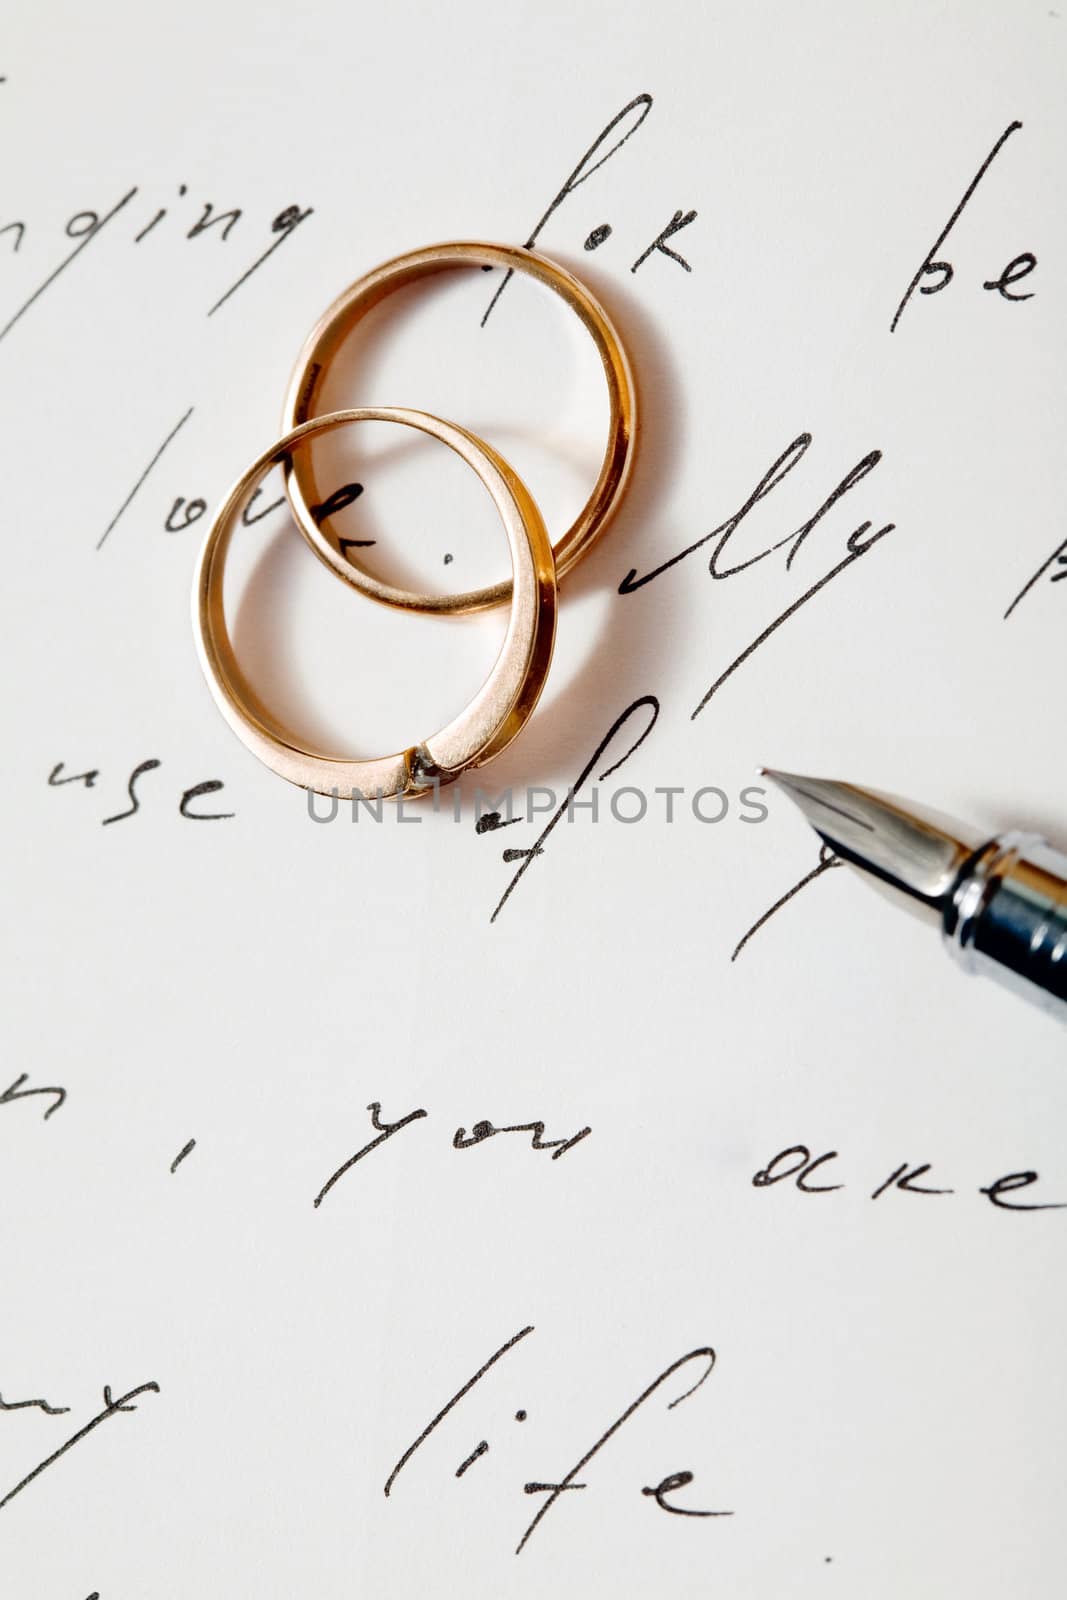 An image of two golden rings on a letter and a pen